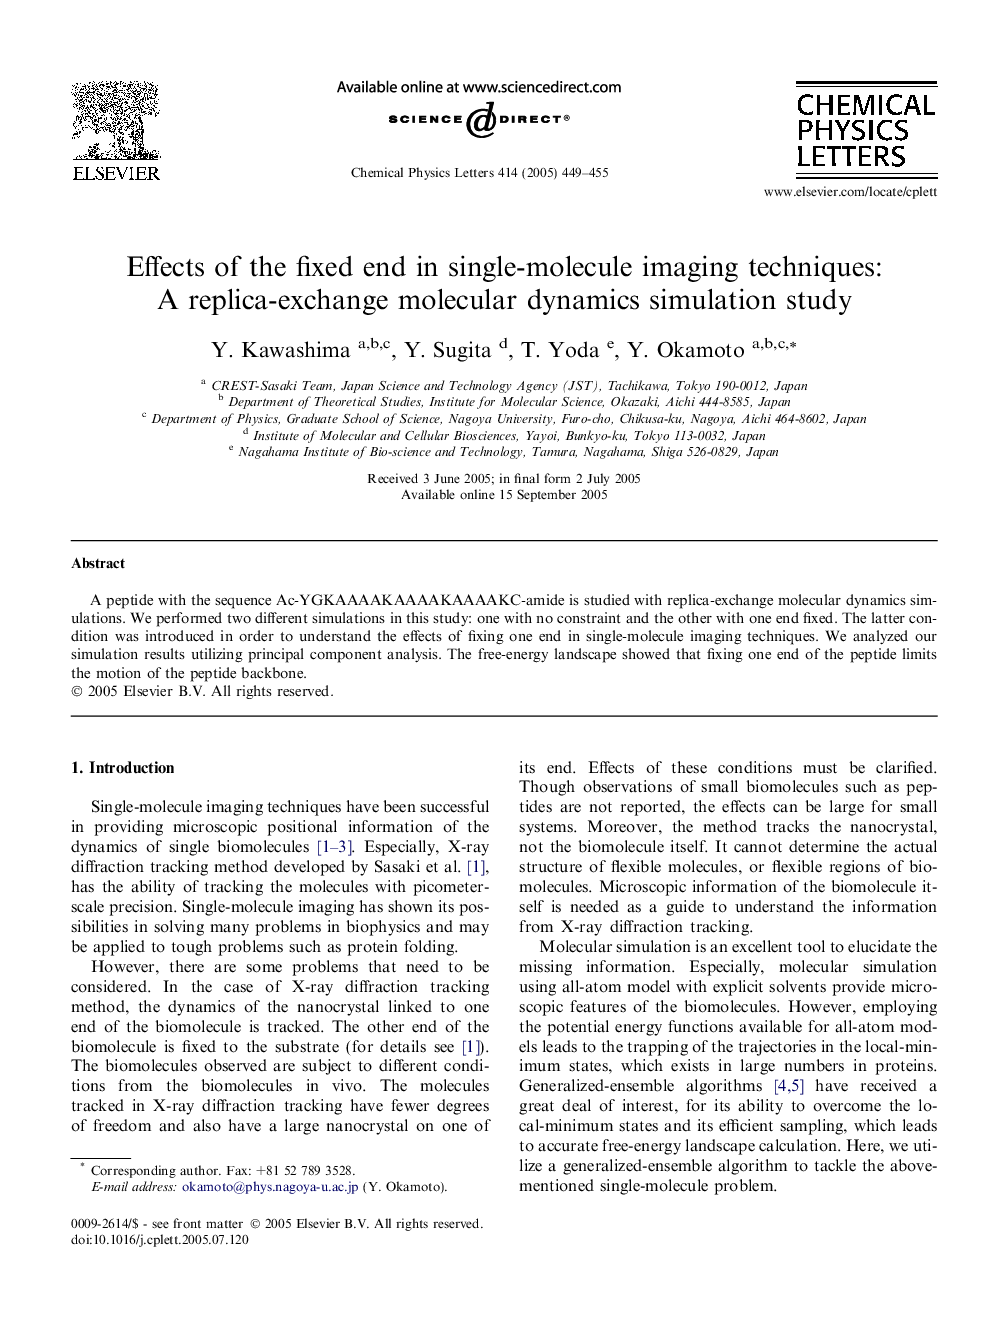 Effects of the fixed end in single-molecule imaging techniques: A replica-exchange molecular dynamics simulation study